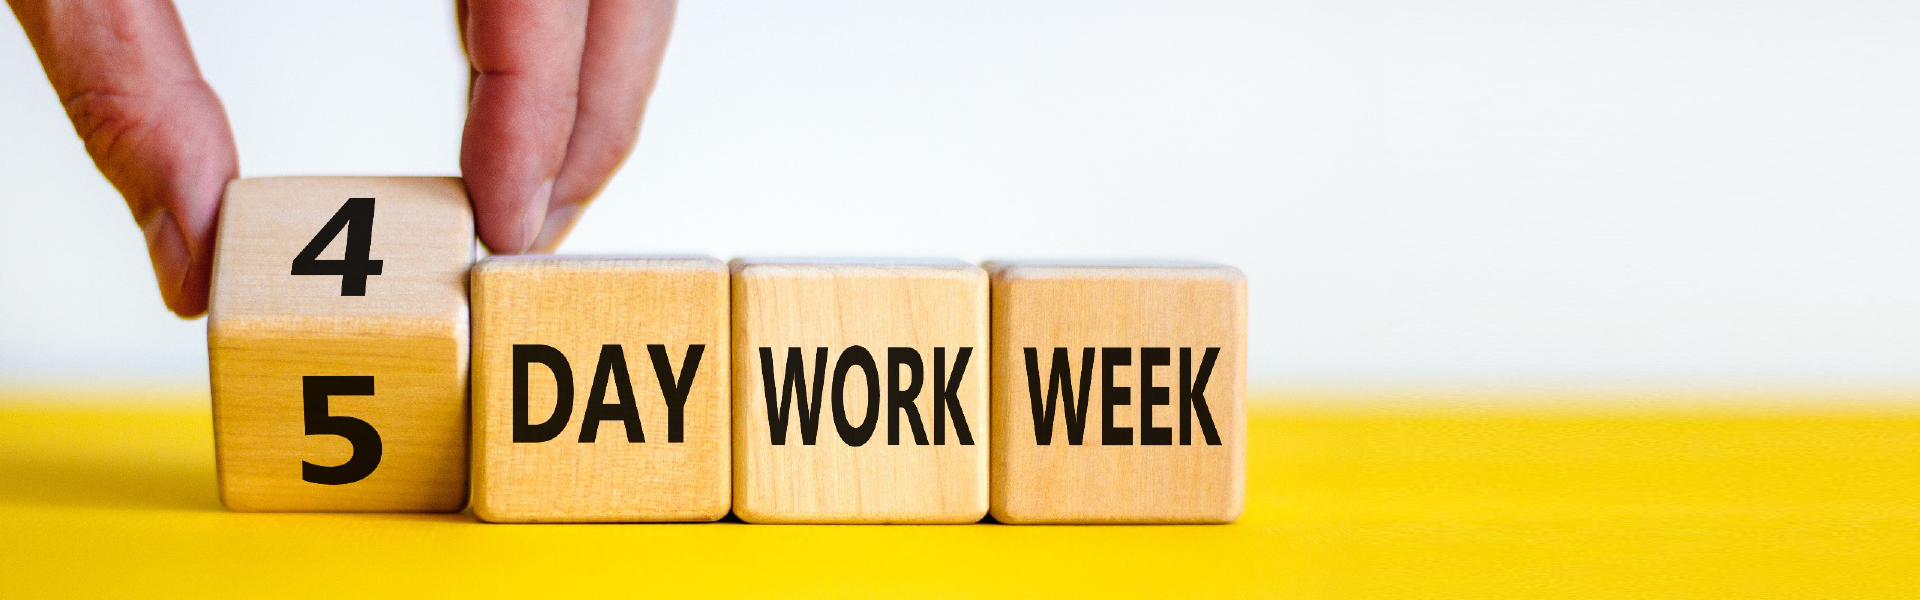 Is A 4 Day Work Week Actually Good For Both Employer and Employee?